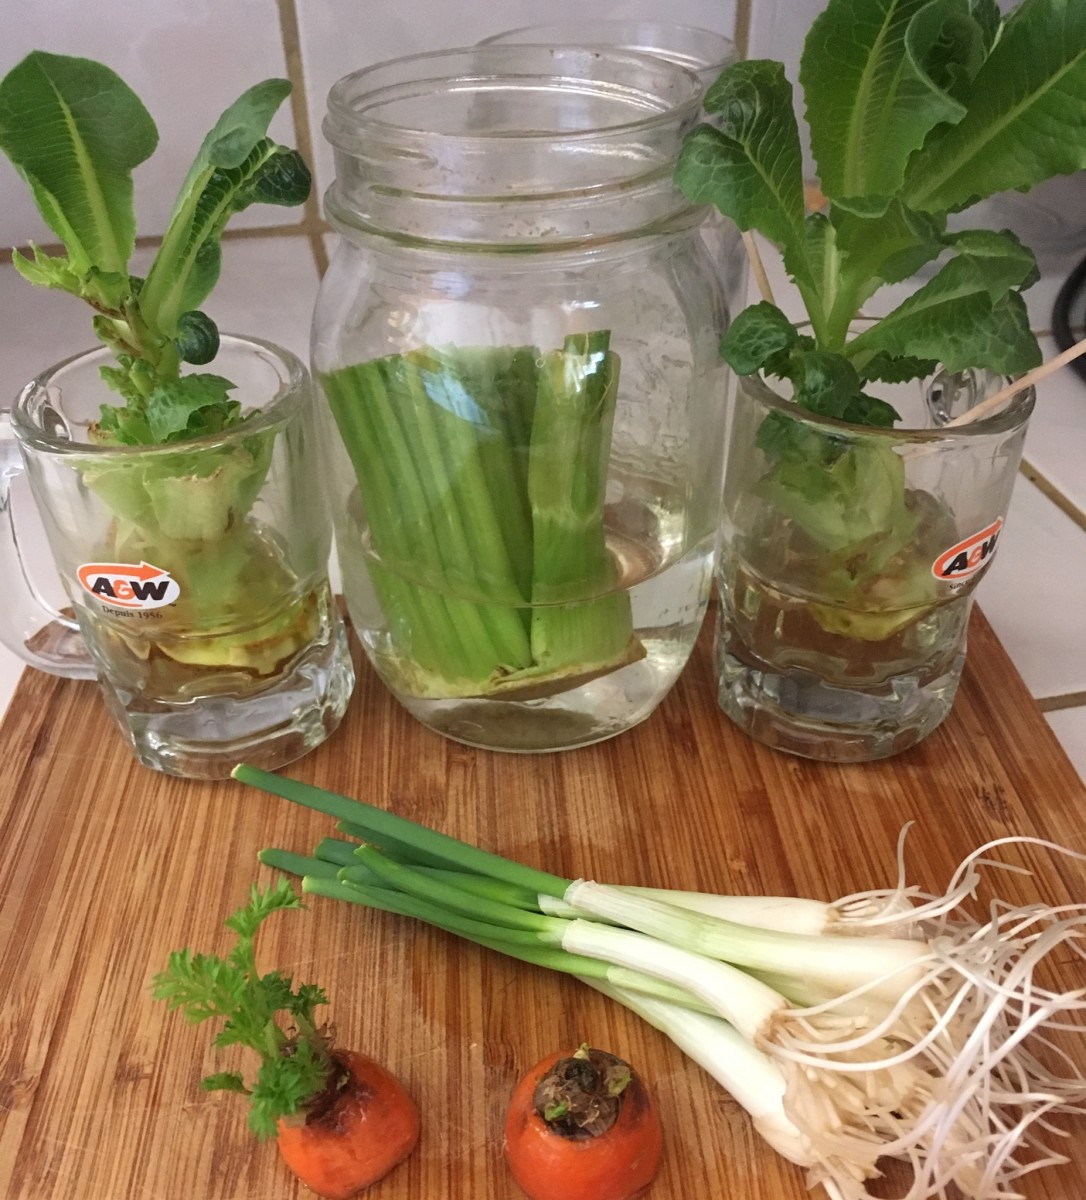 Here are some celery, green onion, lettuce, and carrot scraps after a week of regrowing.